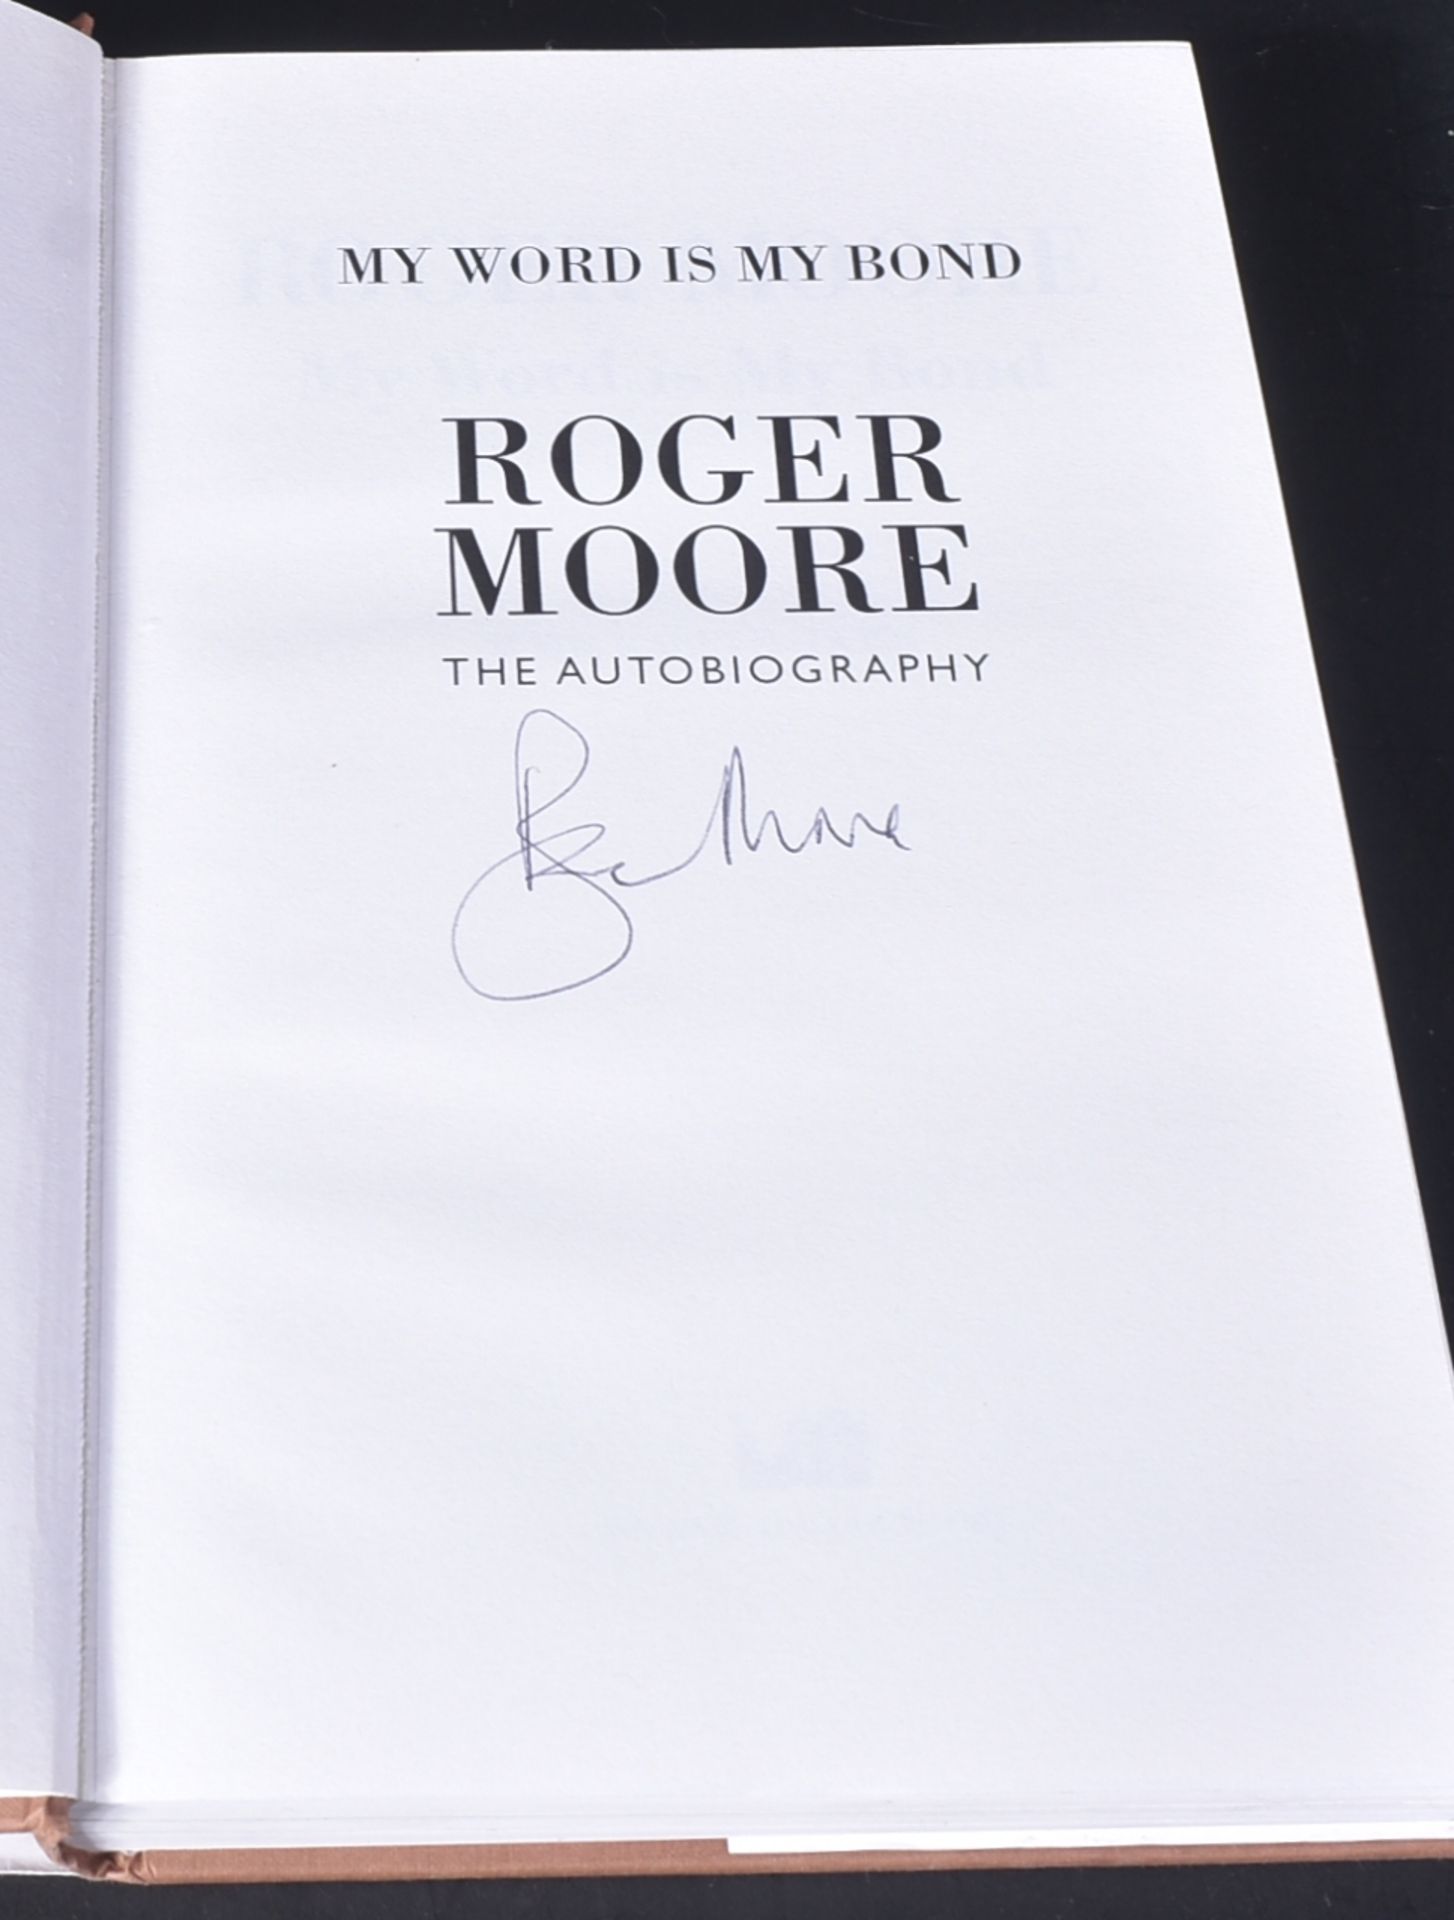 ROGER MOORE - JAMES BOND - SIGNED AUTOBIOGRAPHY - Image 2 of 4